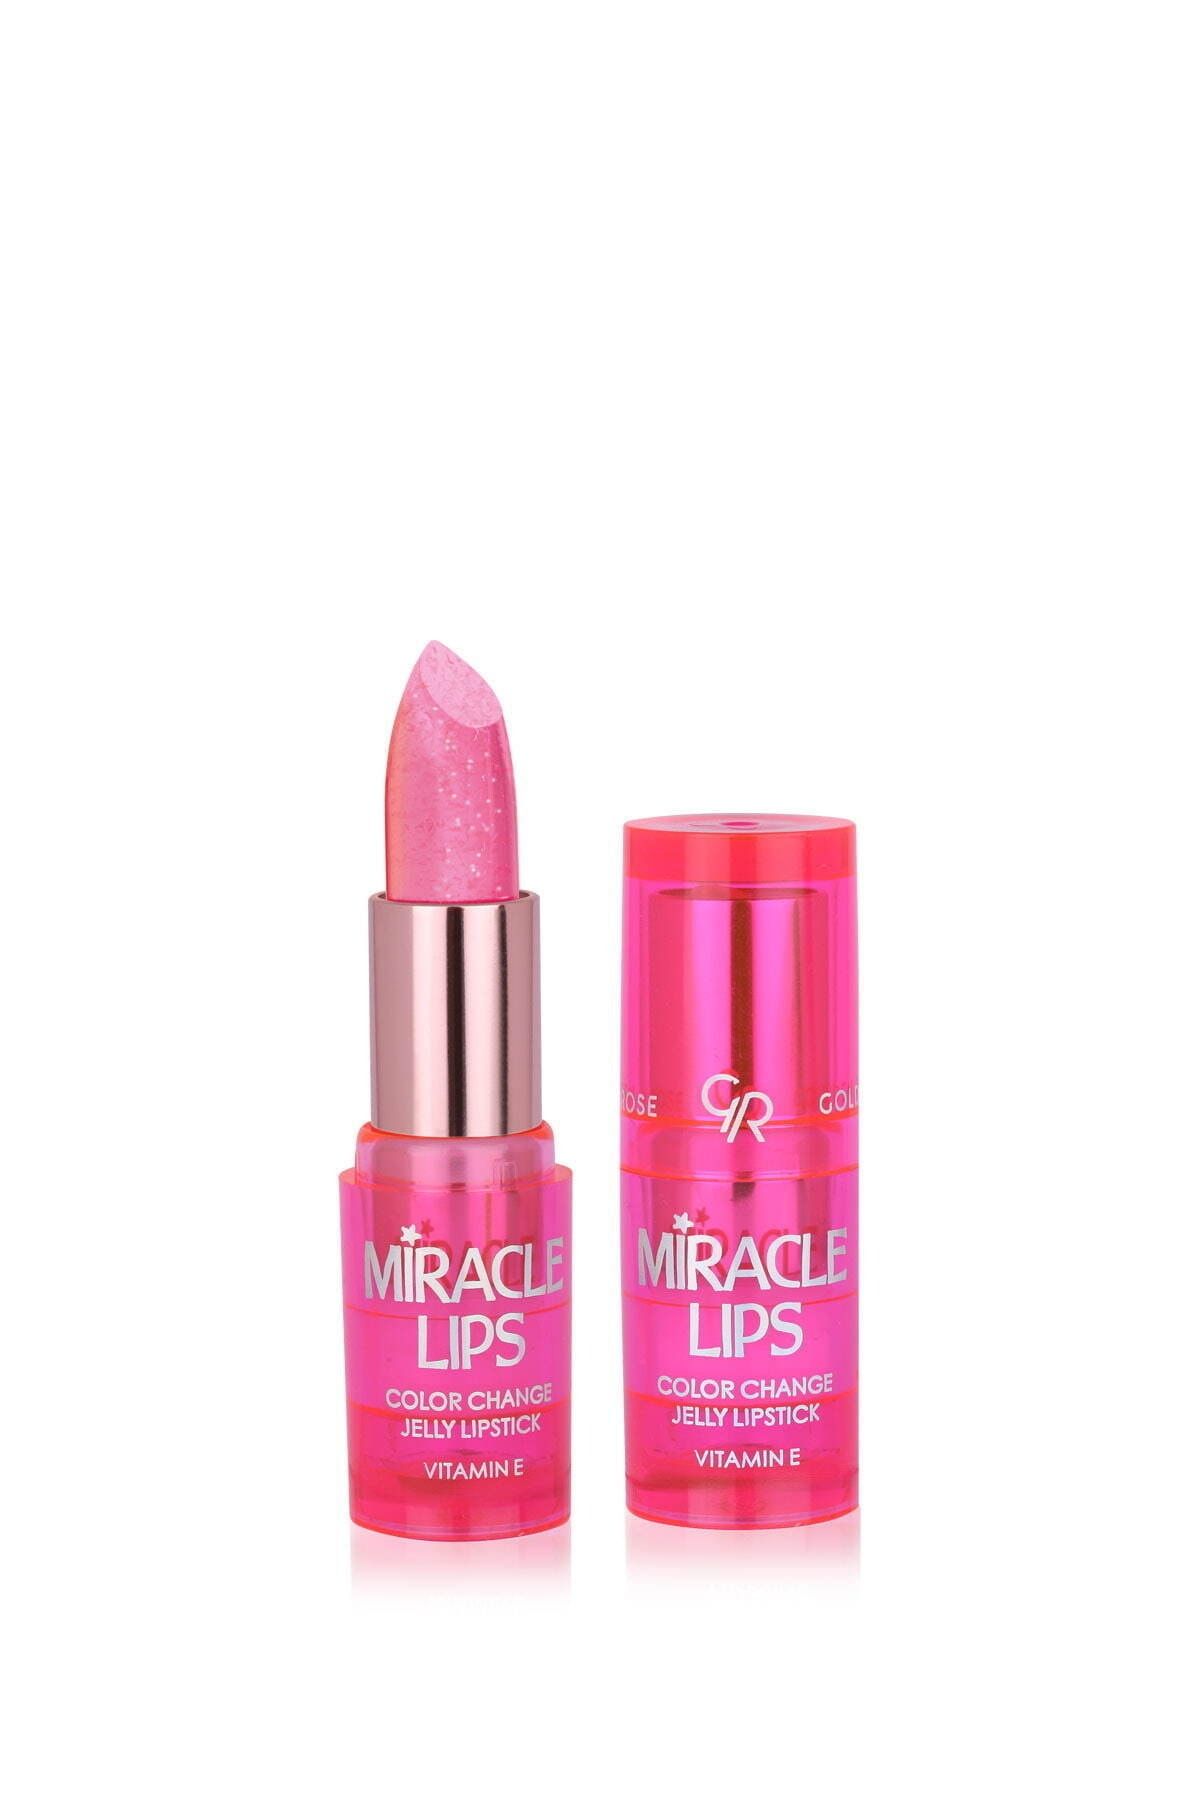 Golden Rose Miracle Lips Color Change Jelly Lipstick No:101 Berry Pink